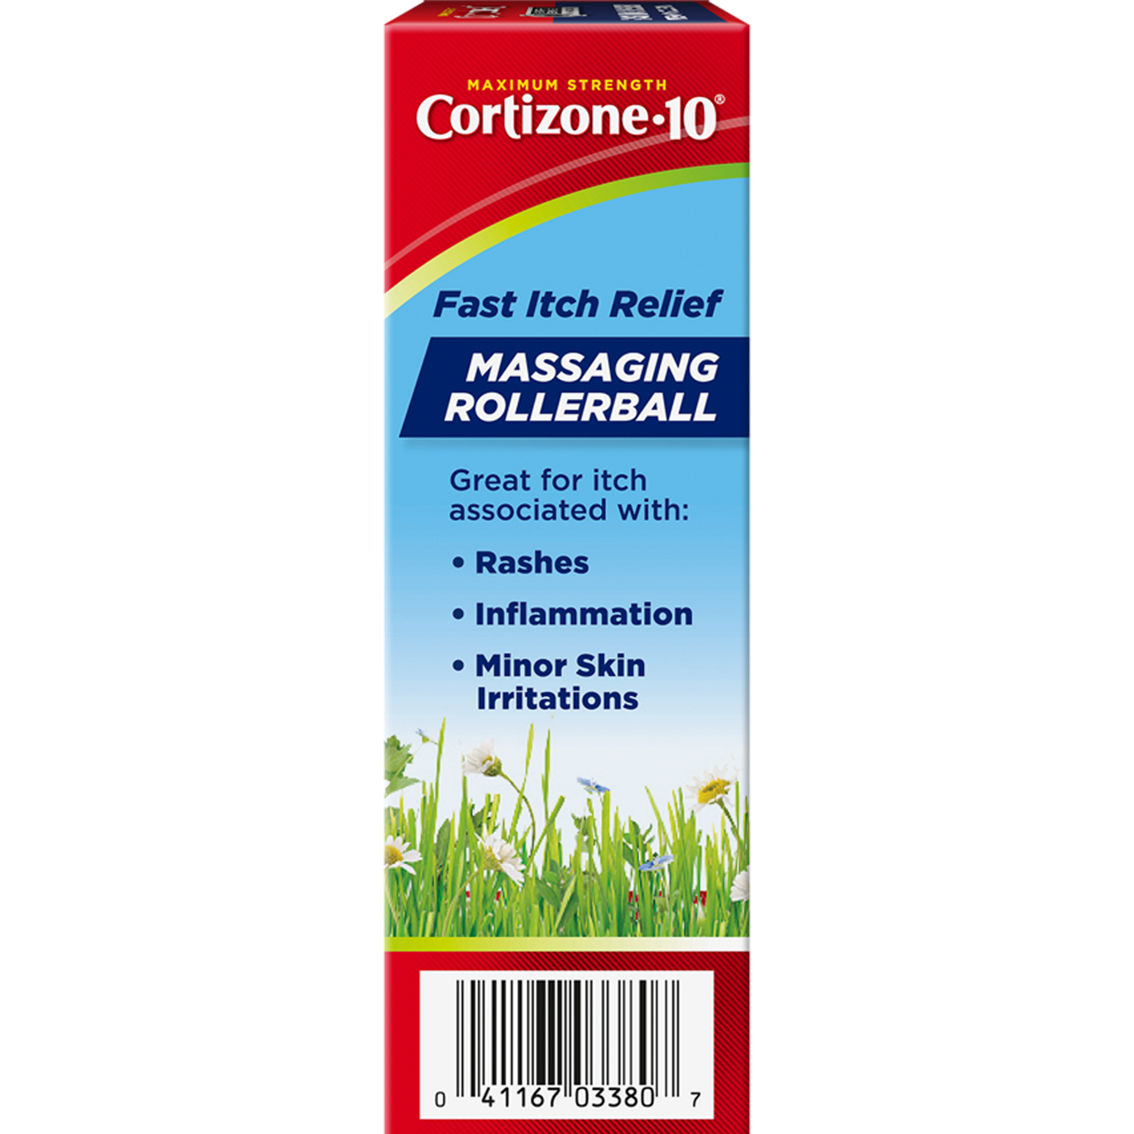 Cortizone 10 Maximum Strength Fast Itch Relief Massaging Rollerball - Image 3 of 4